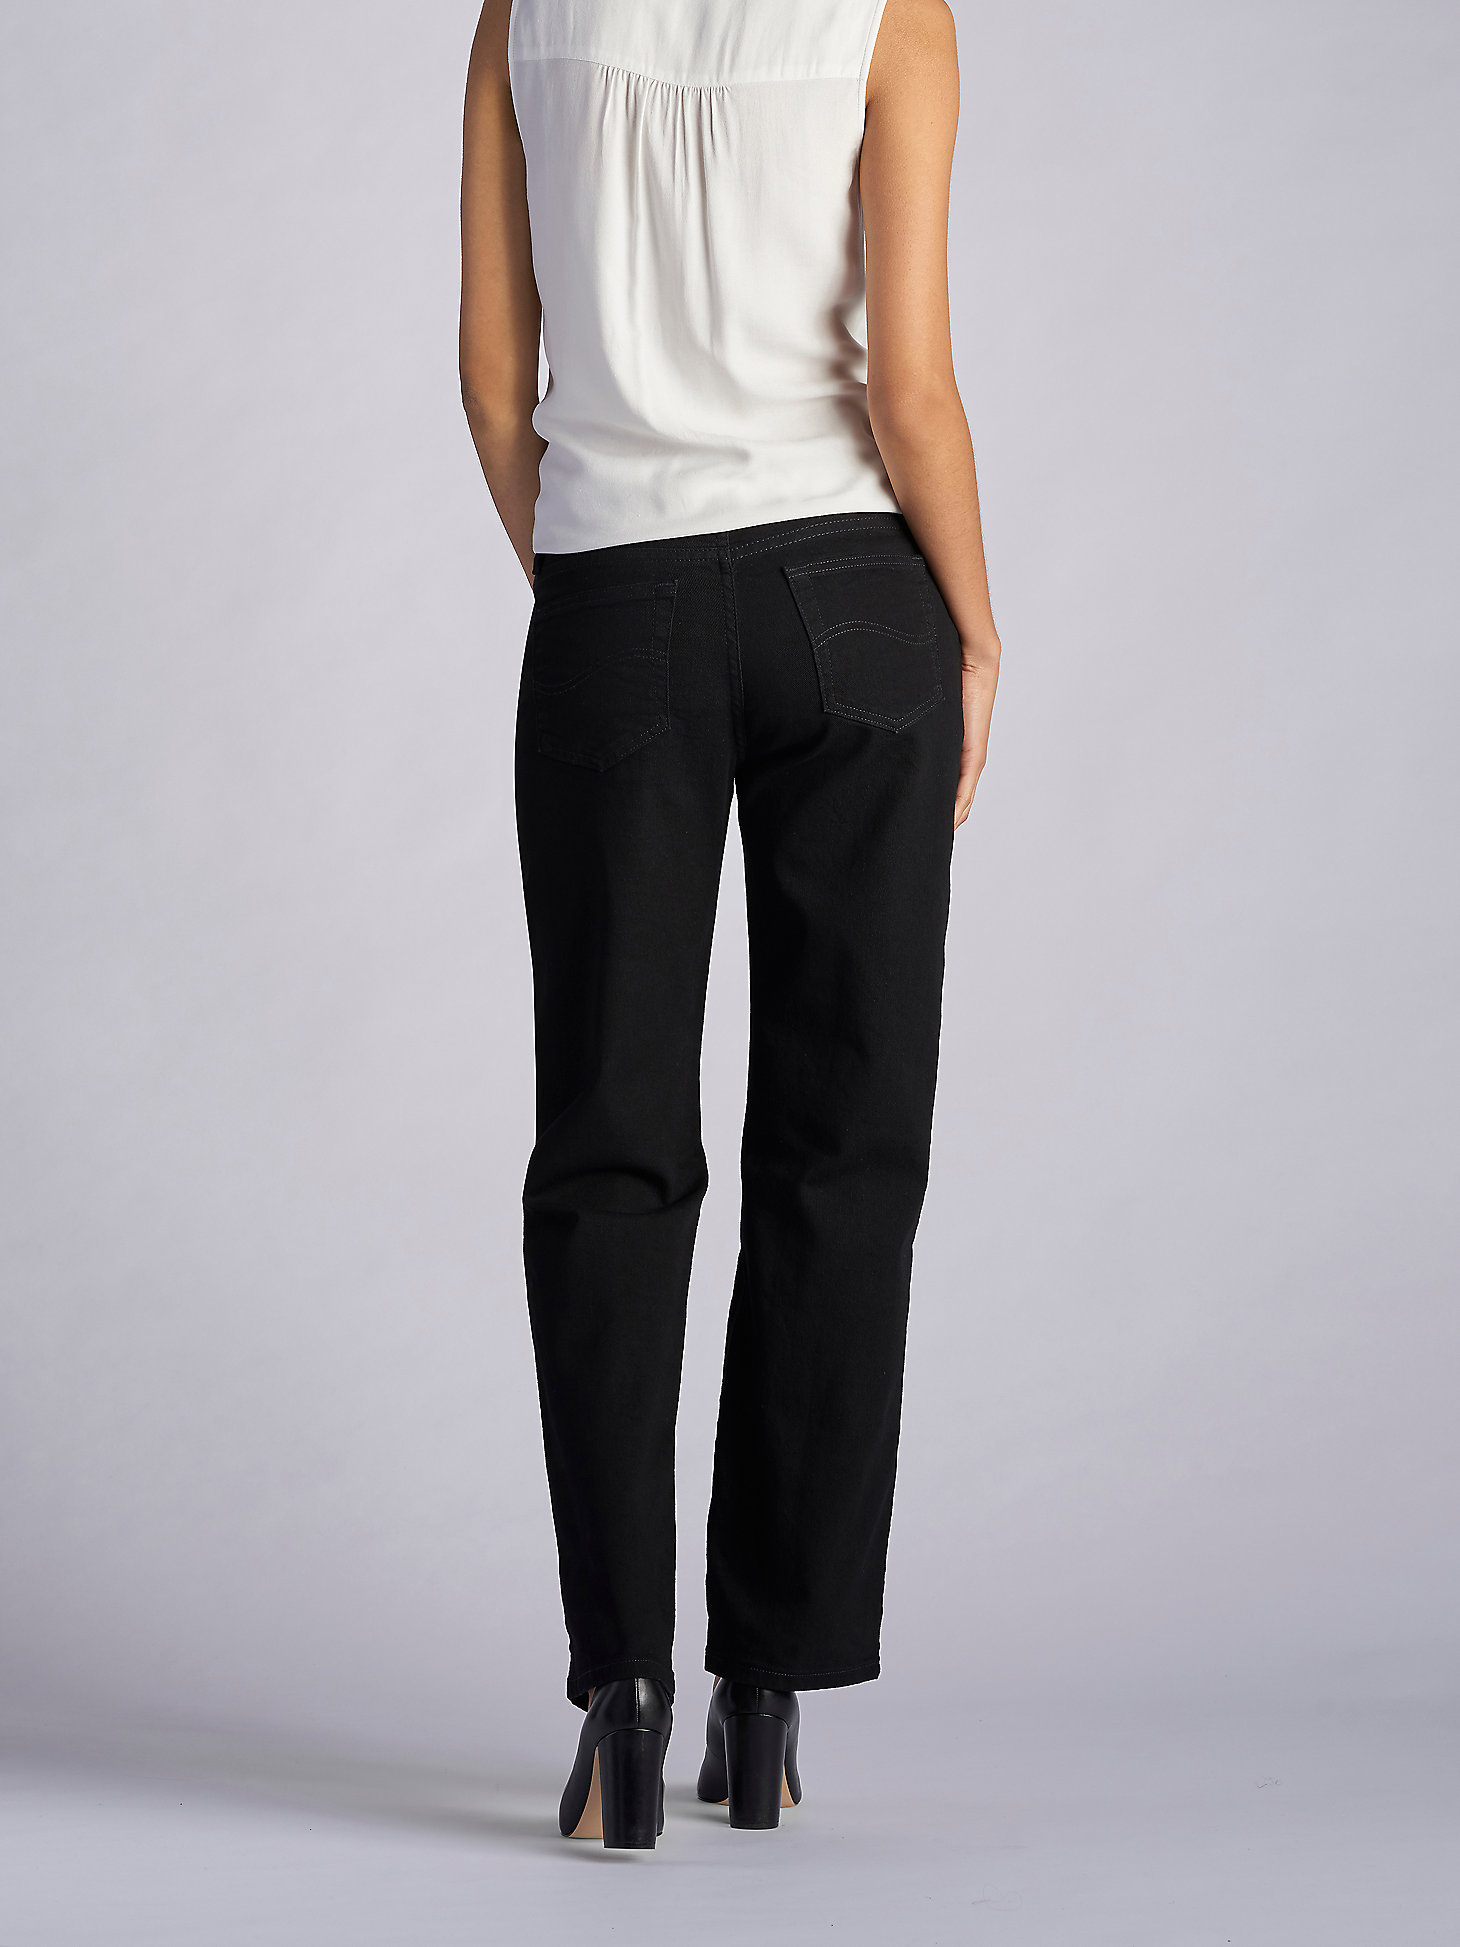 Lee Womens Tall Relaxed Fit Plain Front Straight Leg Pant